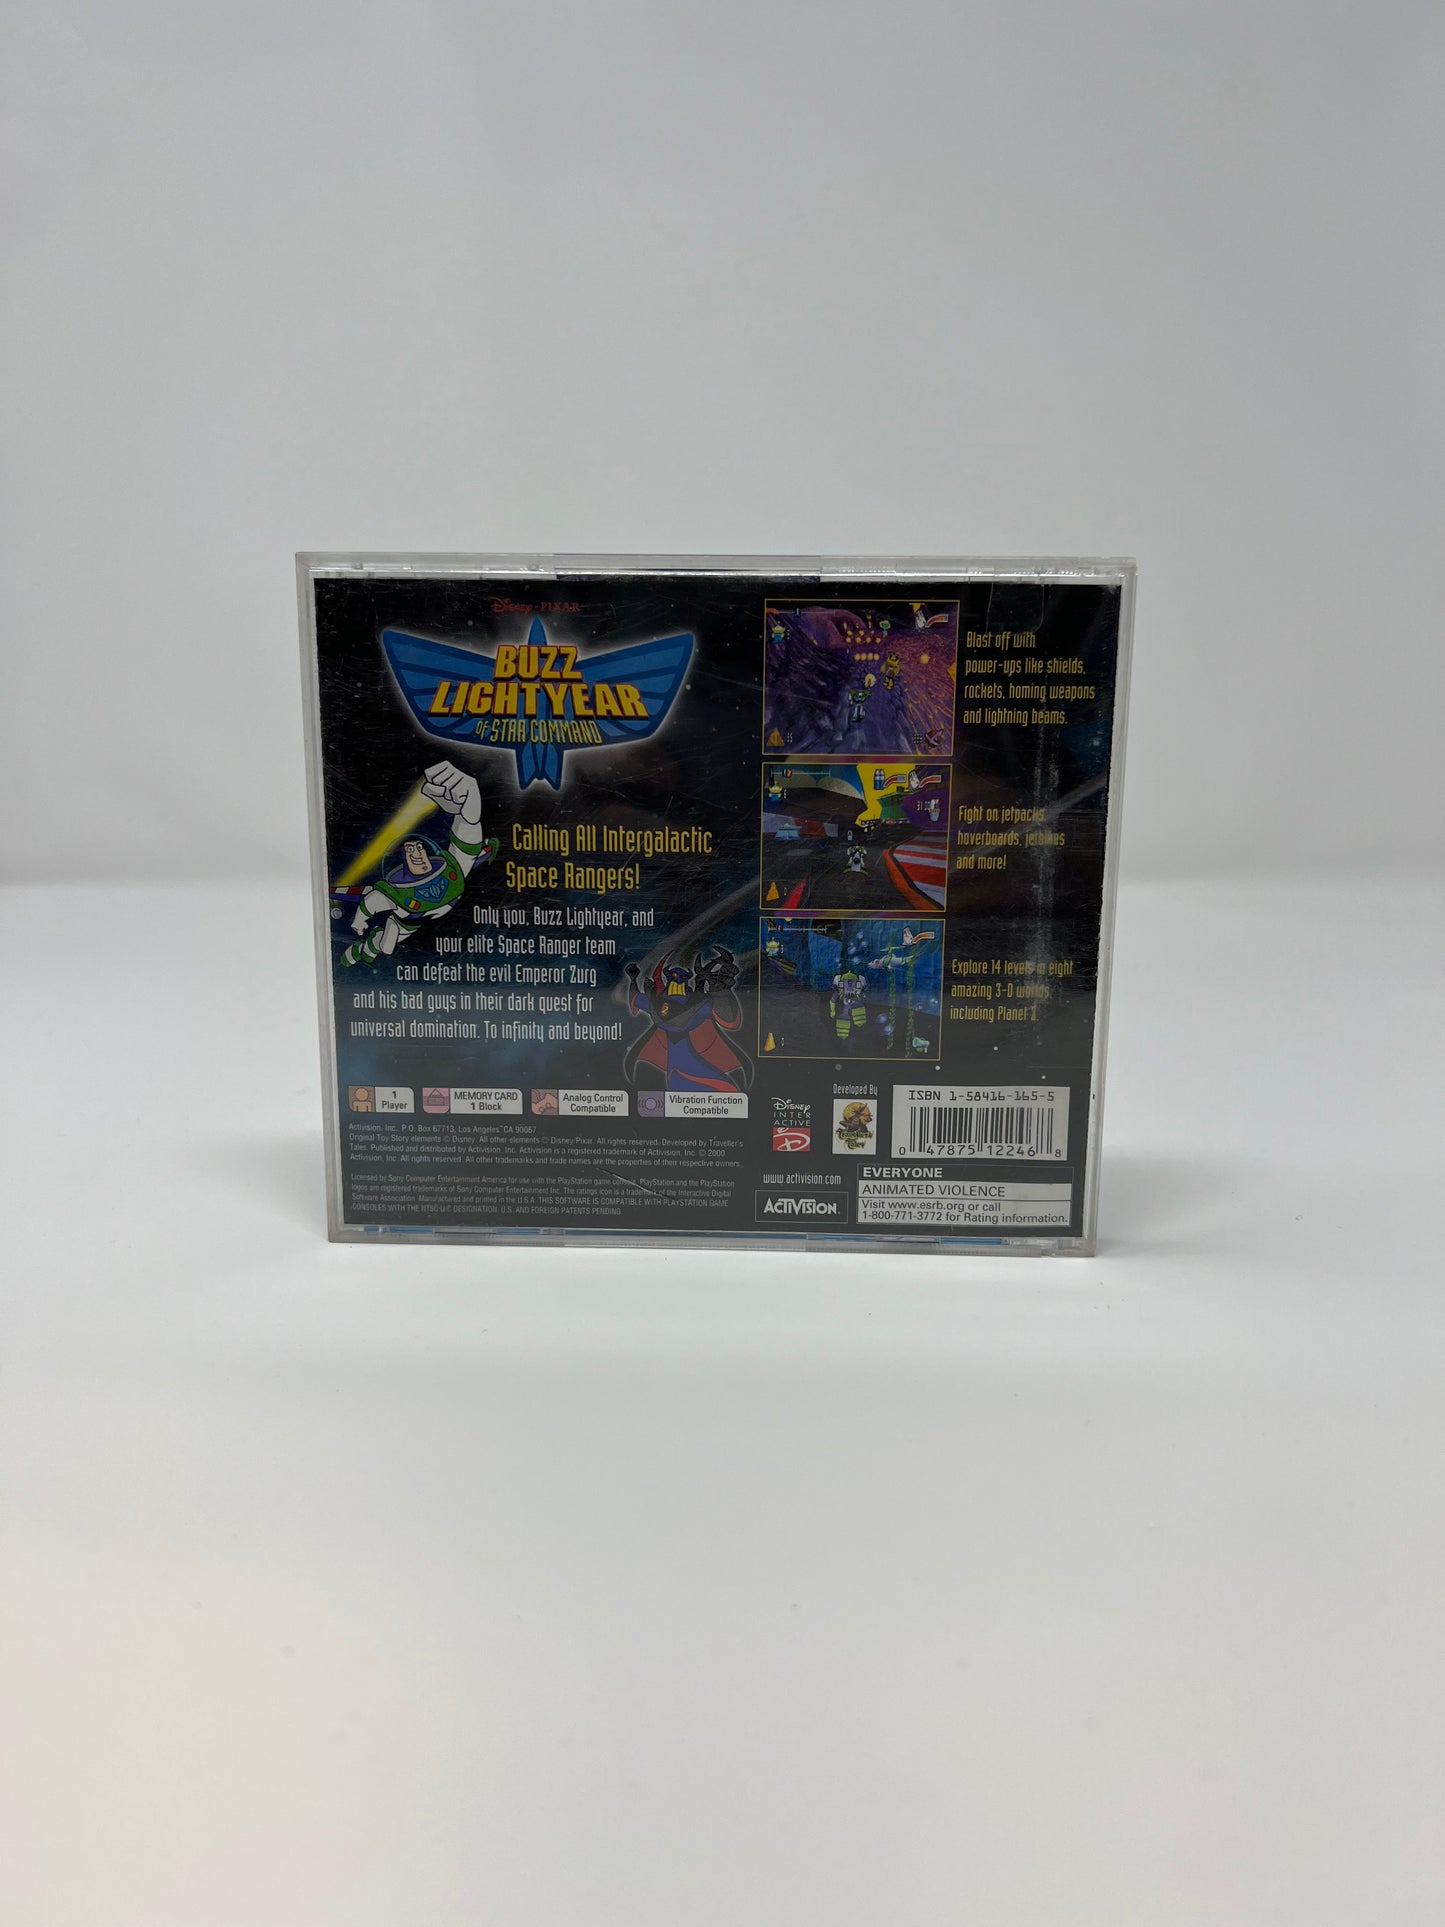 Buzz Lightyear of Star Command - PS1 Game - Used